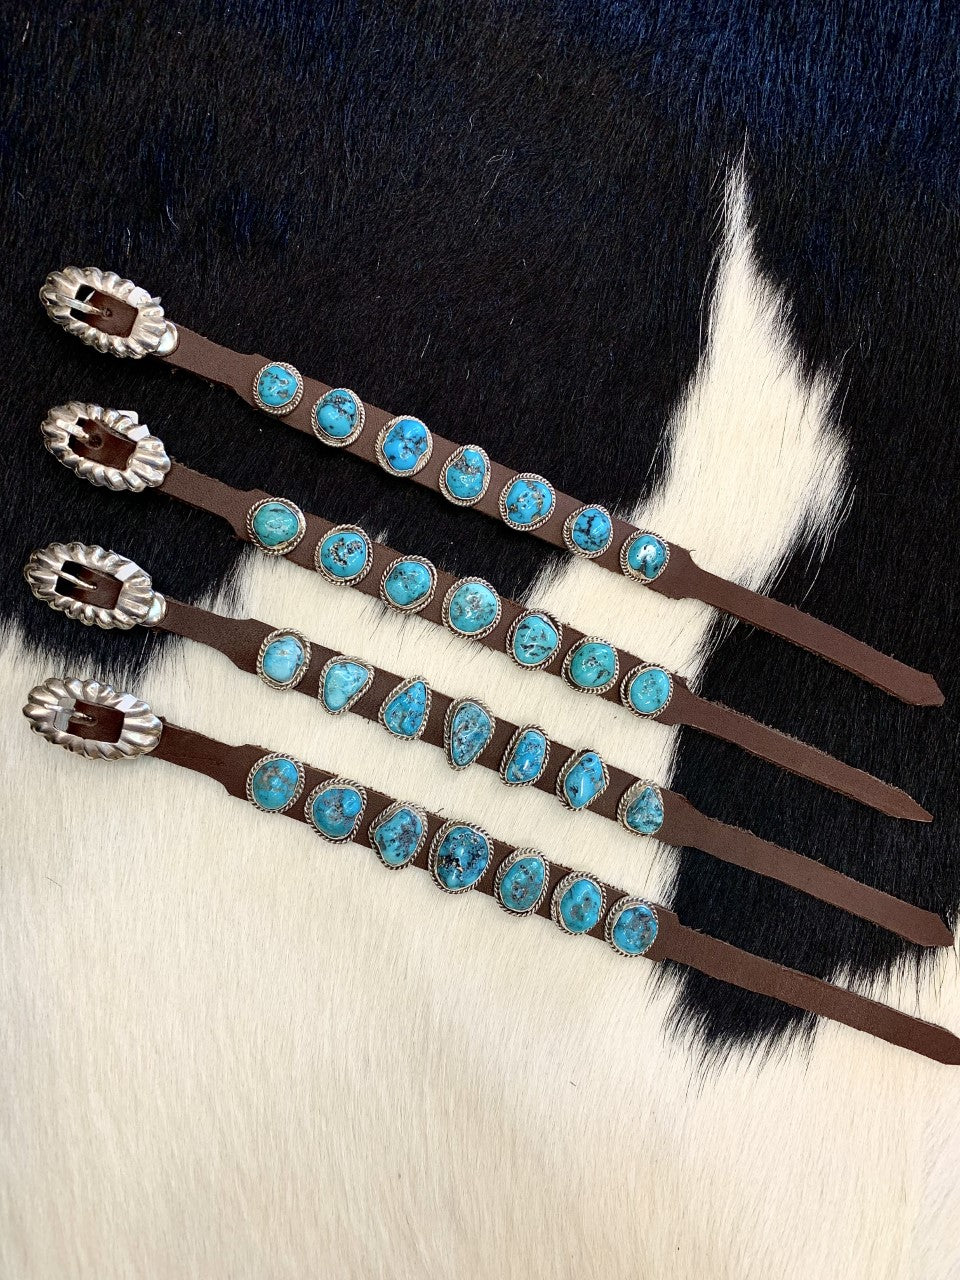 Leather Bracelet with Turquoise Stones